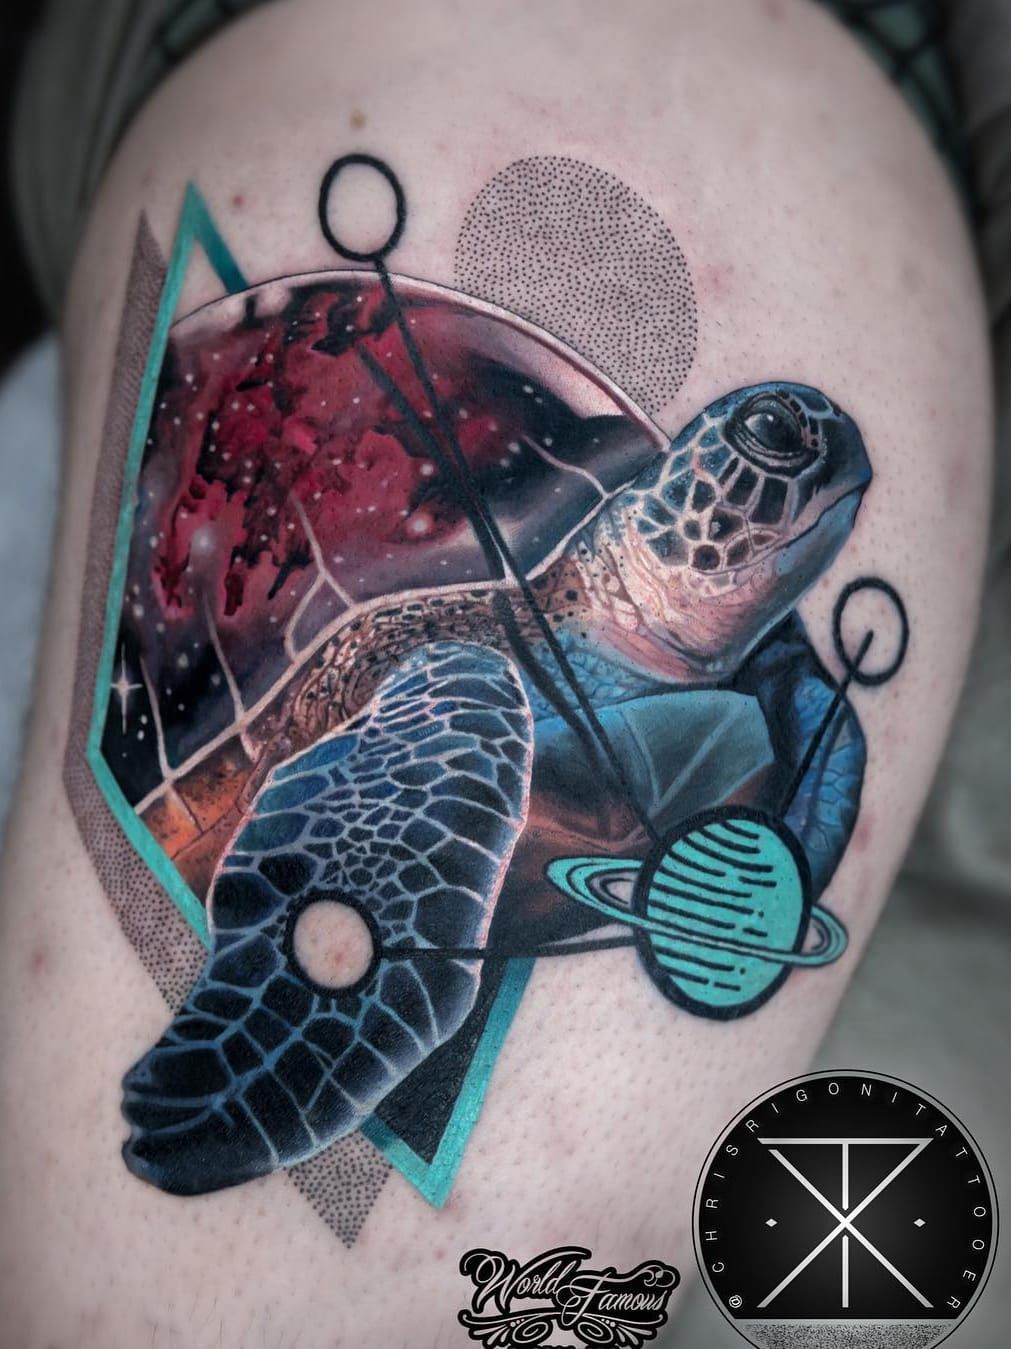 Tattoo uploaded by Angela FoxInx  Cover up angelafoxinx foxinx  blackandgreytattoo Black CoverUpTattoos coveruptattoo turtles  turtletattoo  Tattoodo